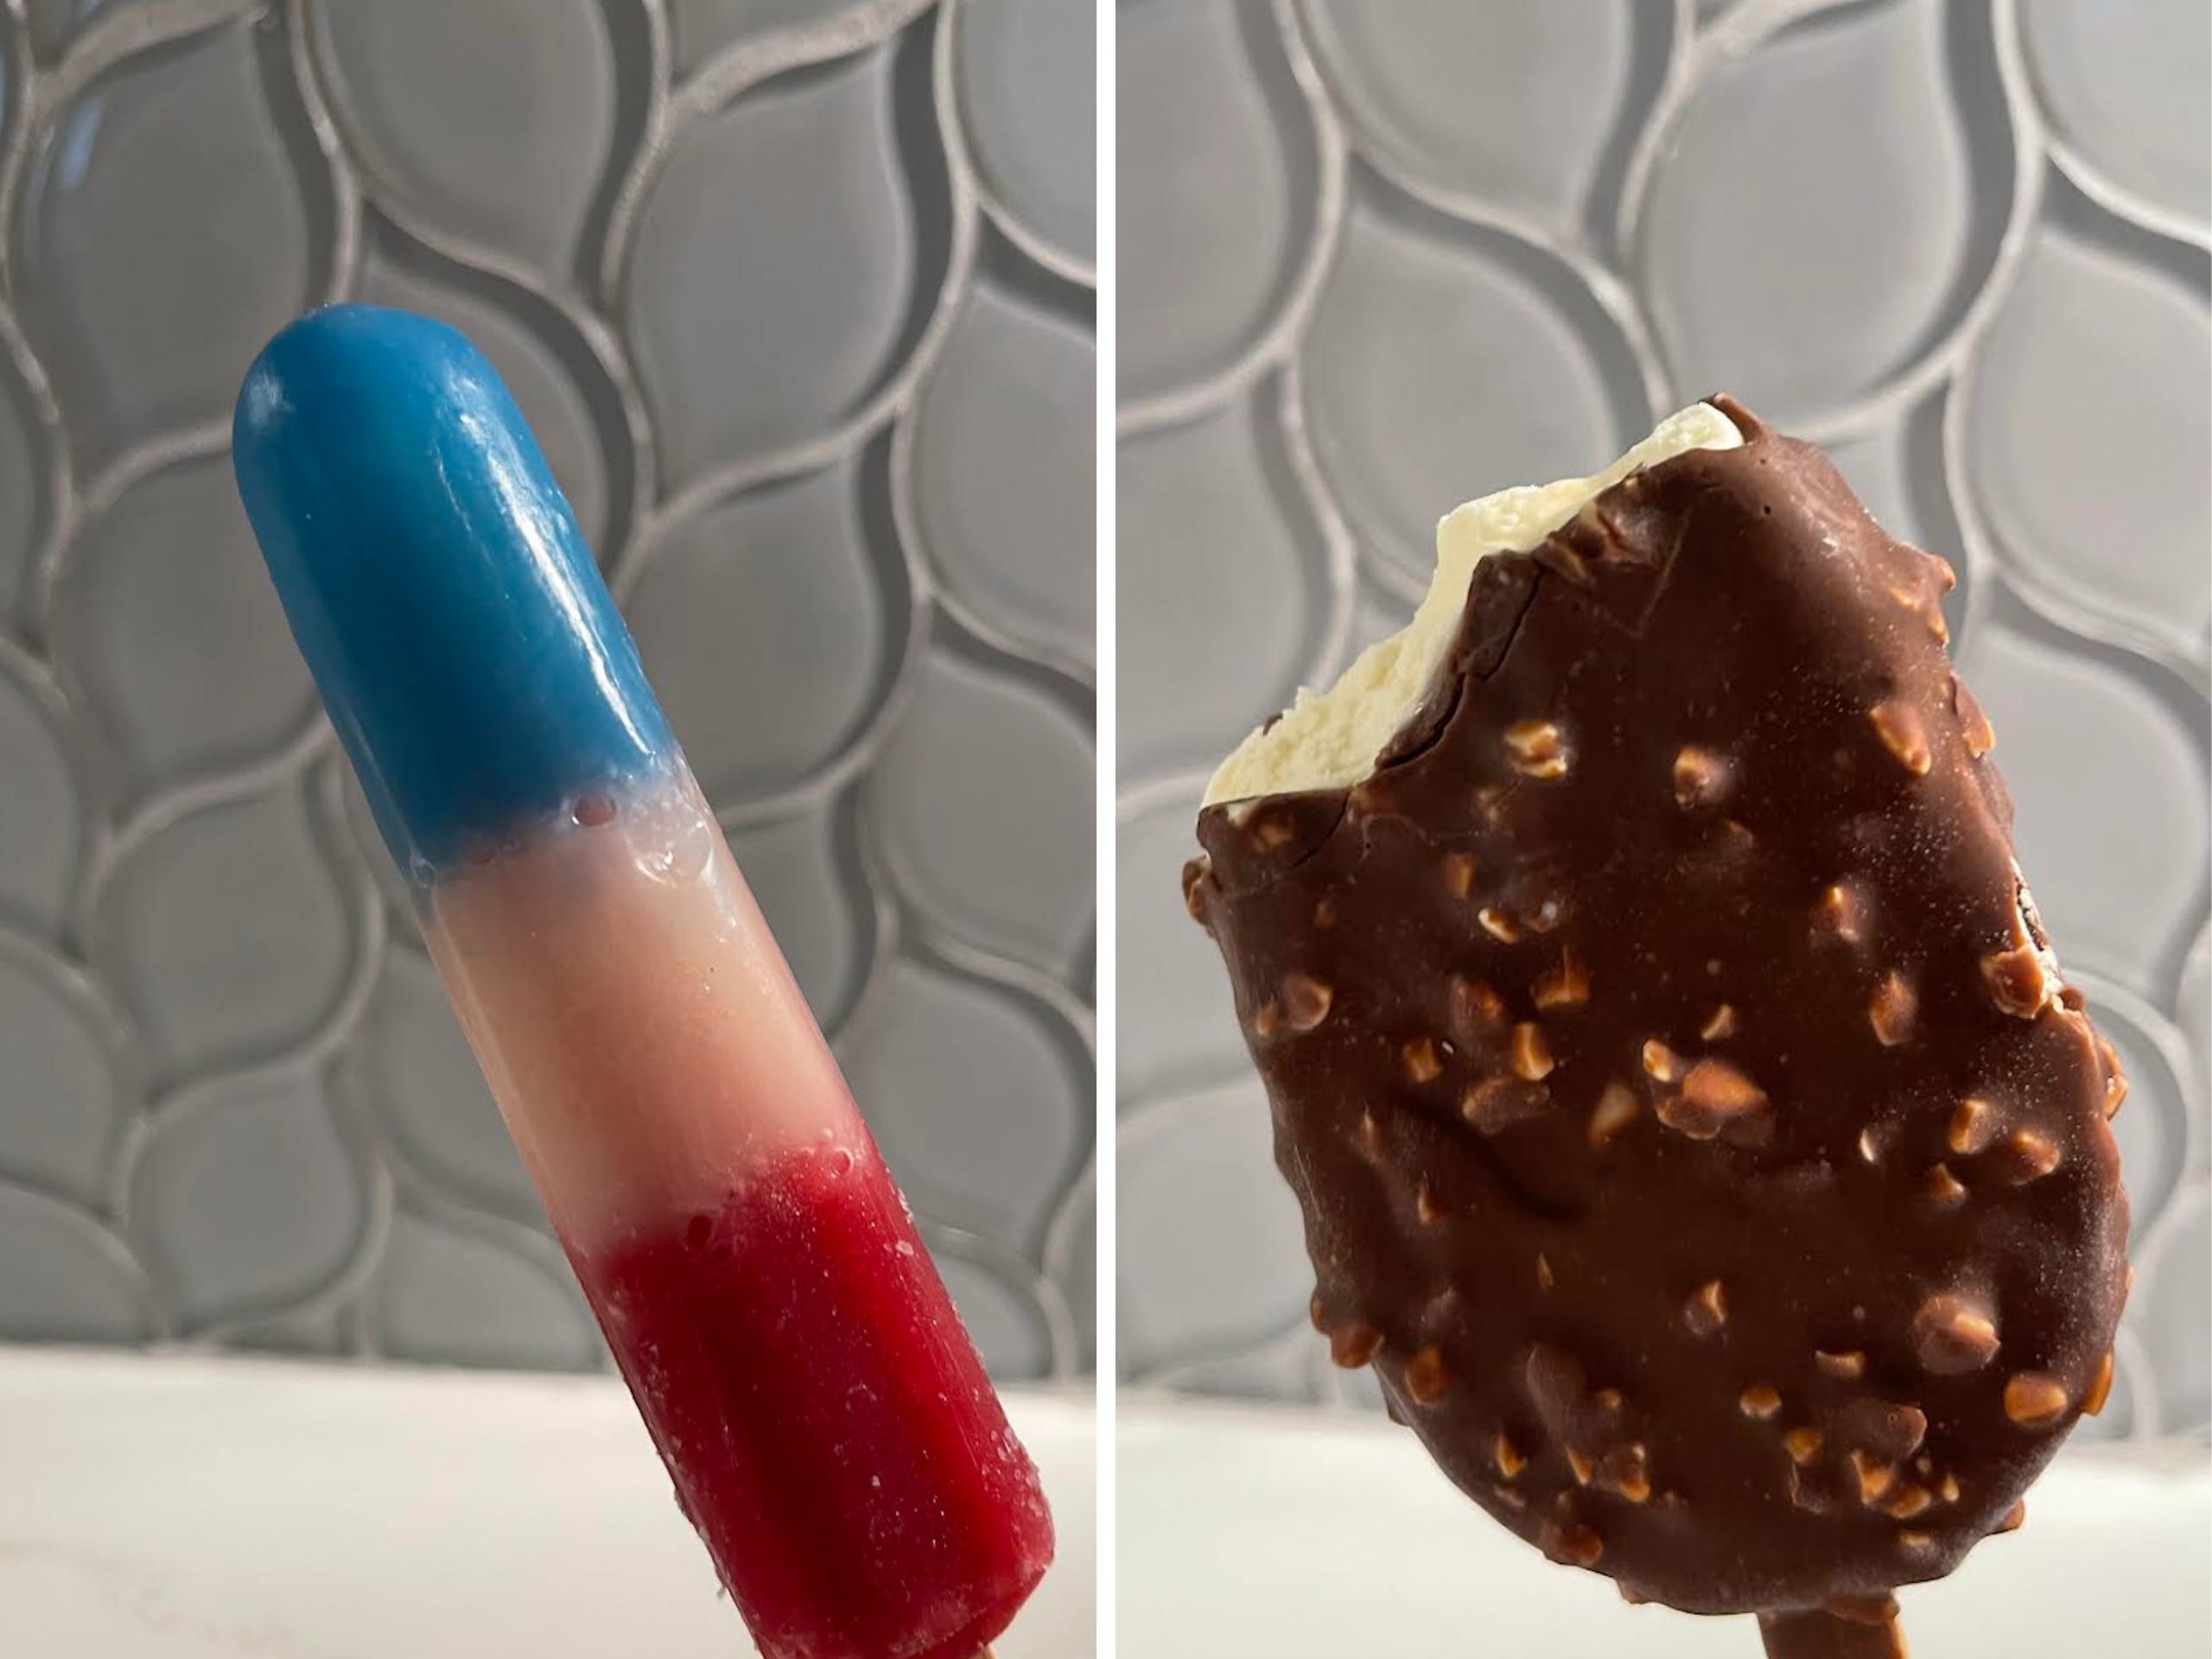 A popsicle and ice cream bar from Costco.